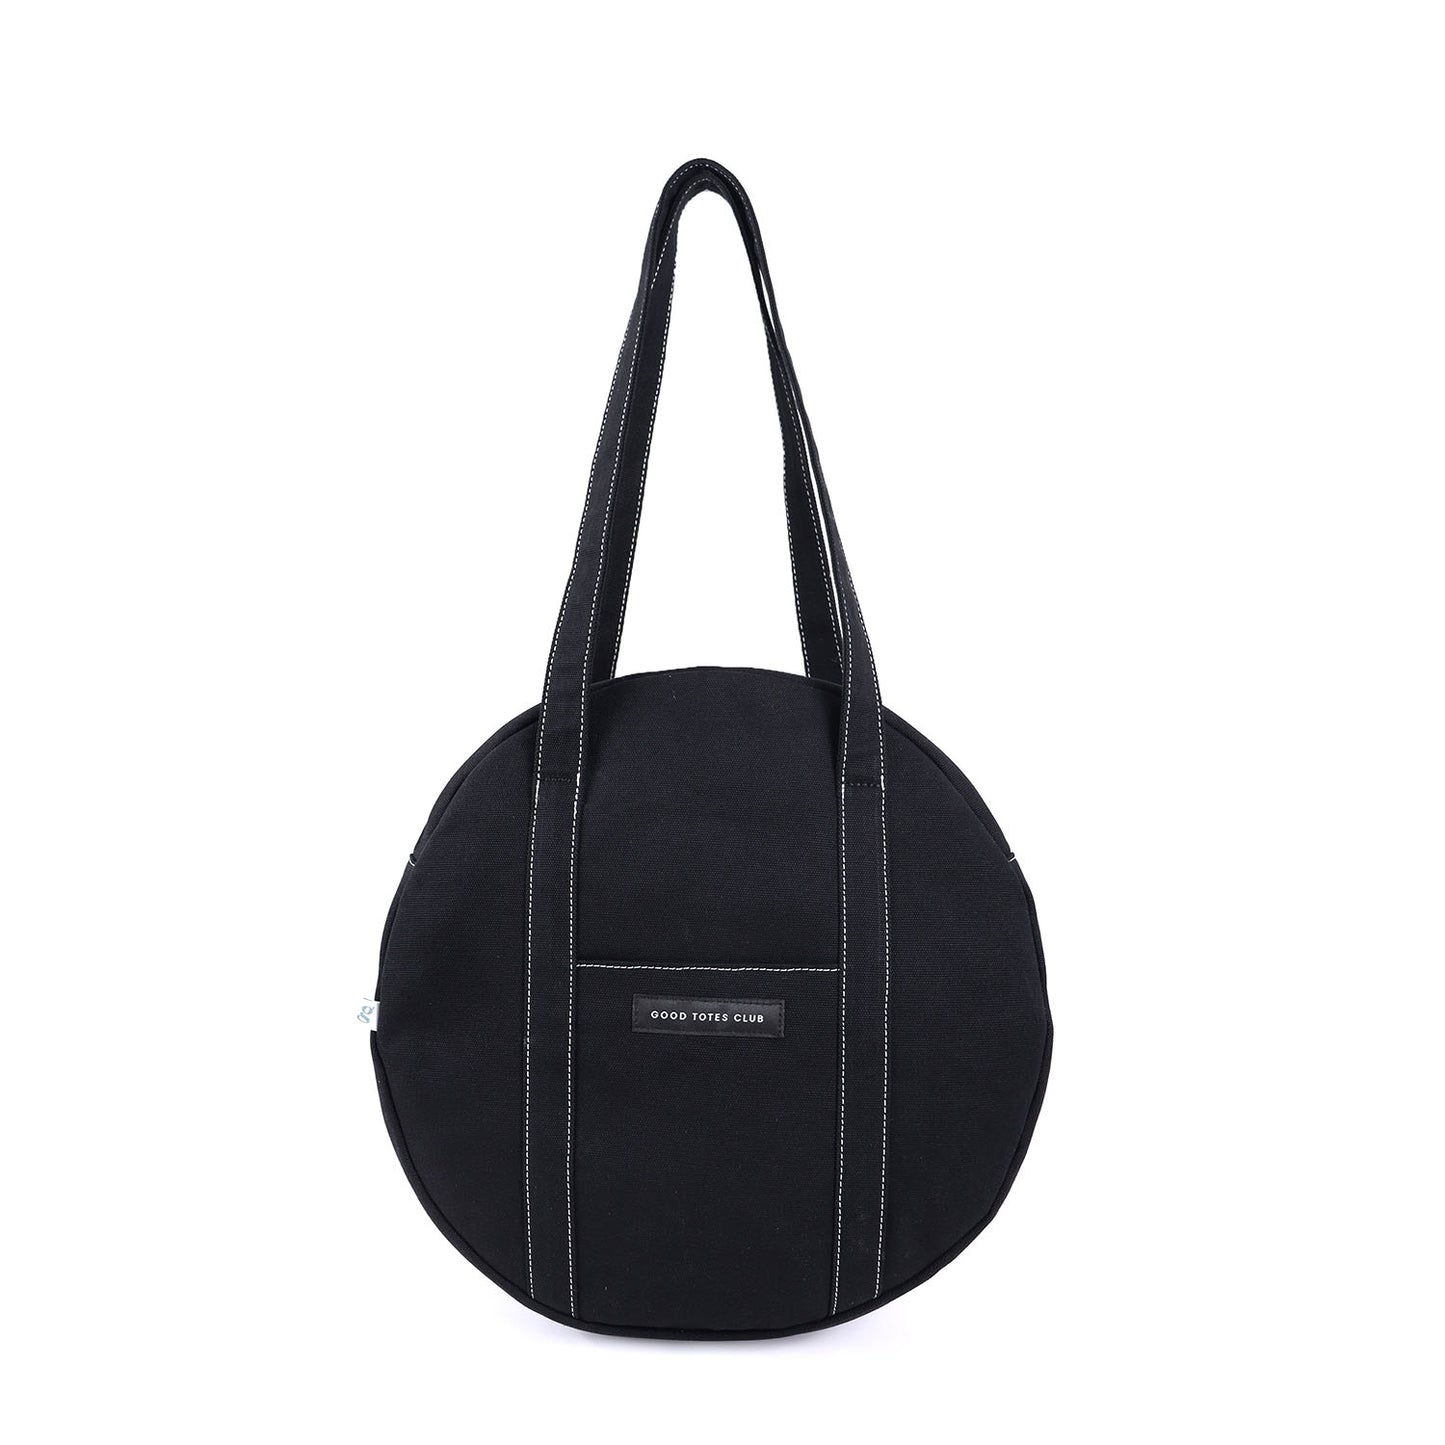 Good Times Circle Tote (Contrast)